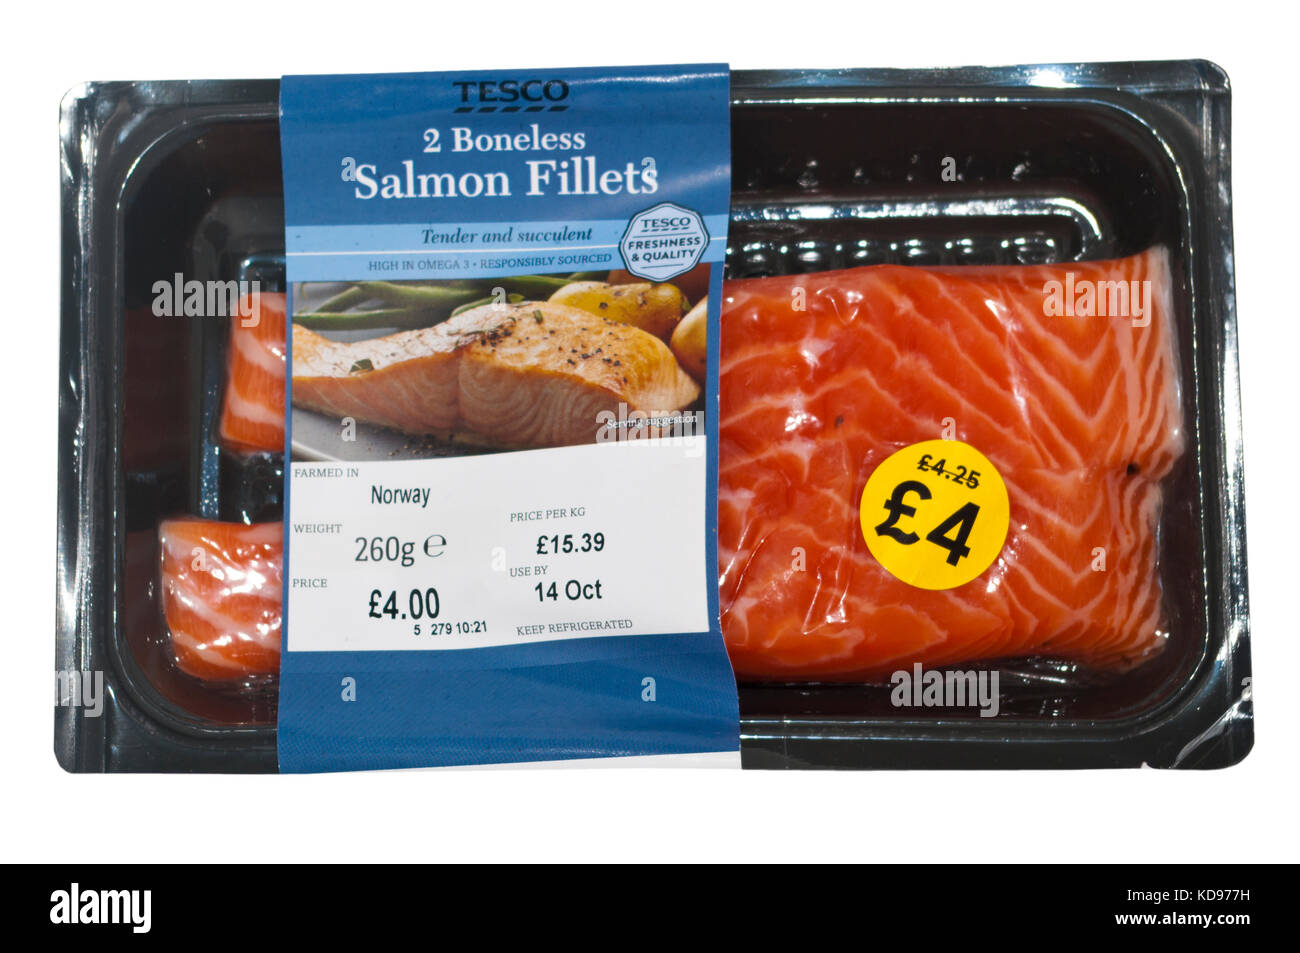 Pack of Tesco Boneless Salmon Fillets Packet Of Tescos Own Brand Products Stock Photo